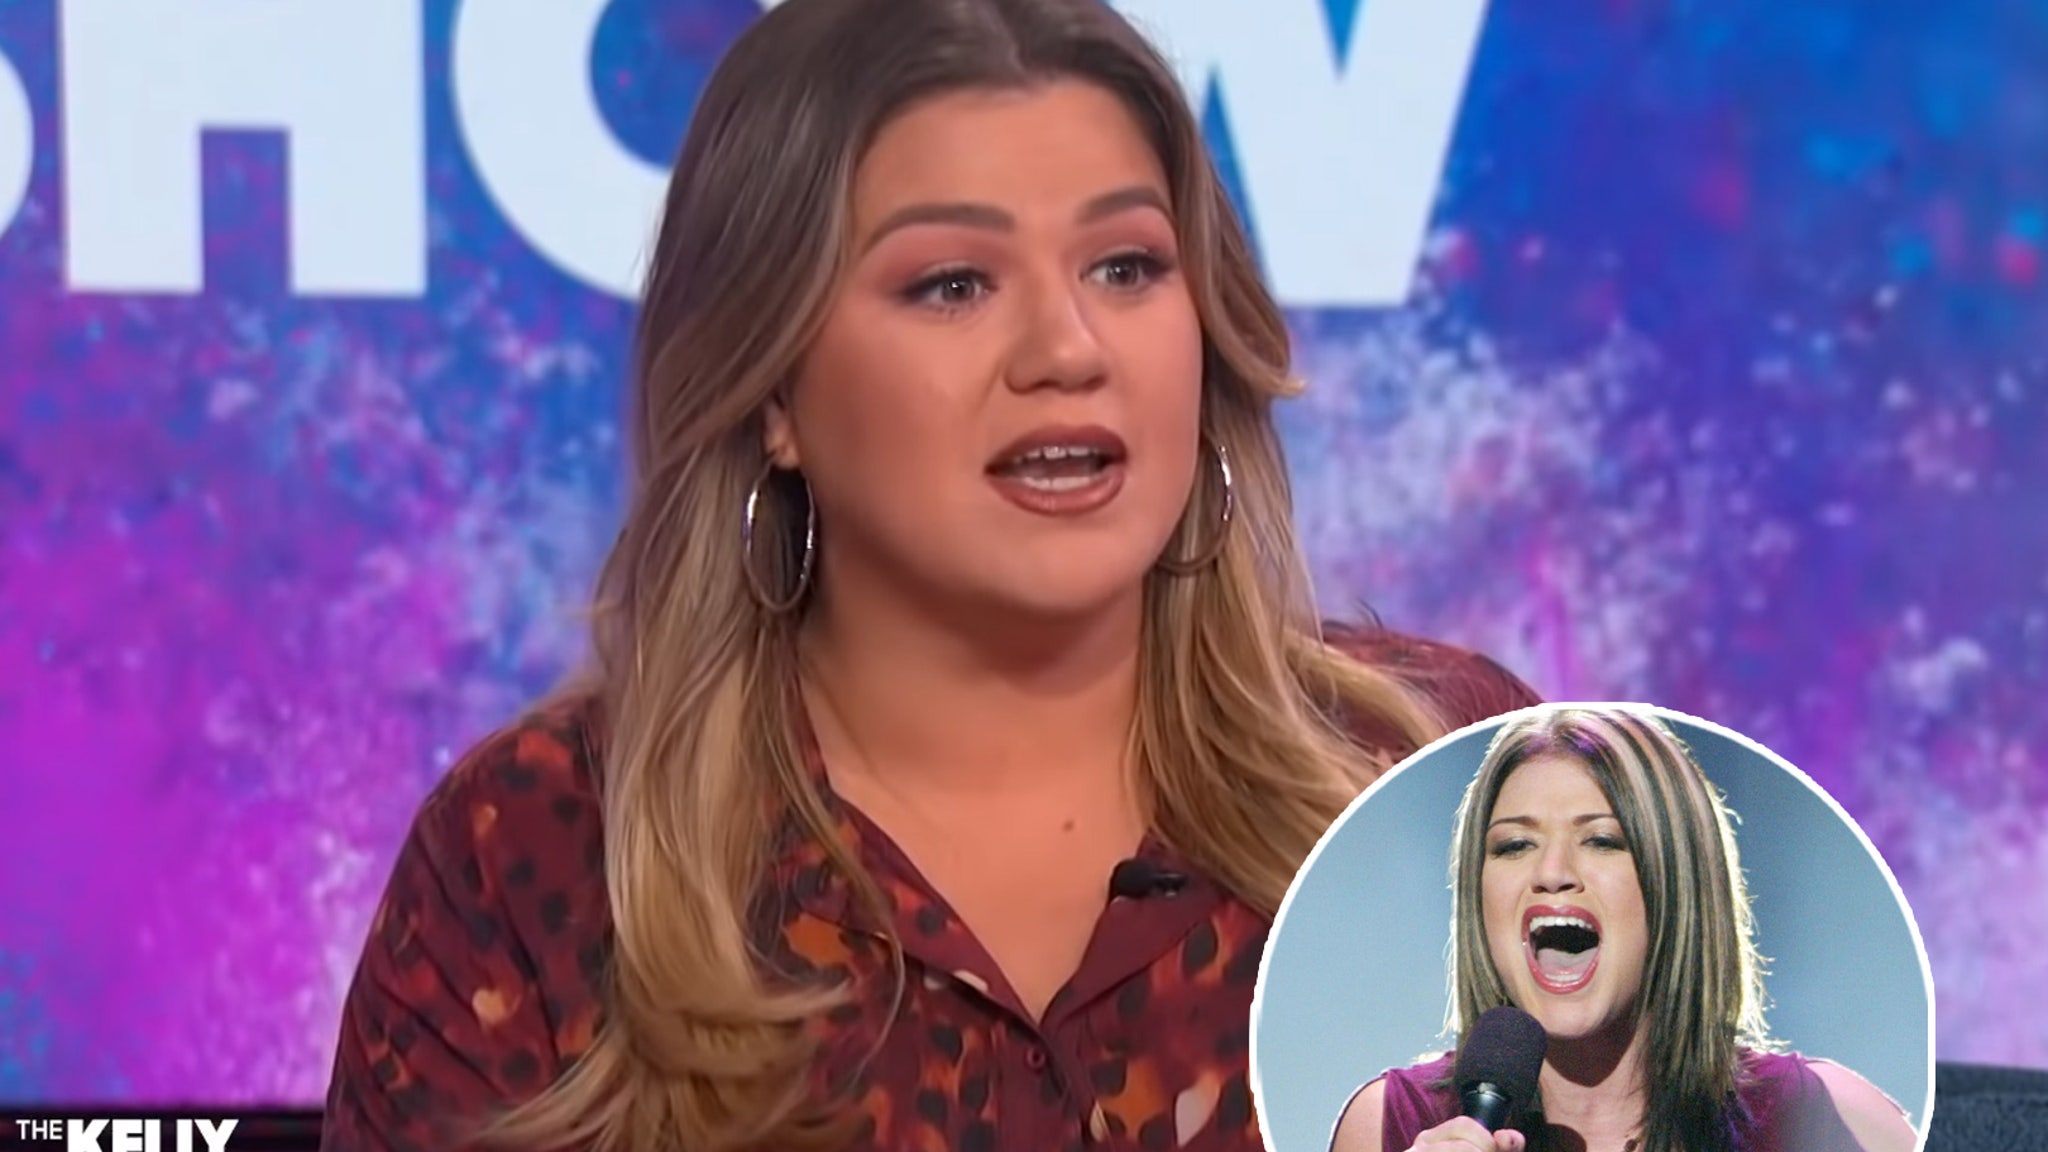 Kelly Clarkson reveals that celebrities were “bad” and “rude” to her during her American Idol days